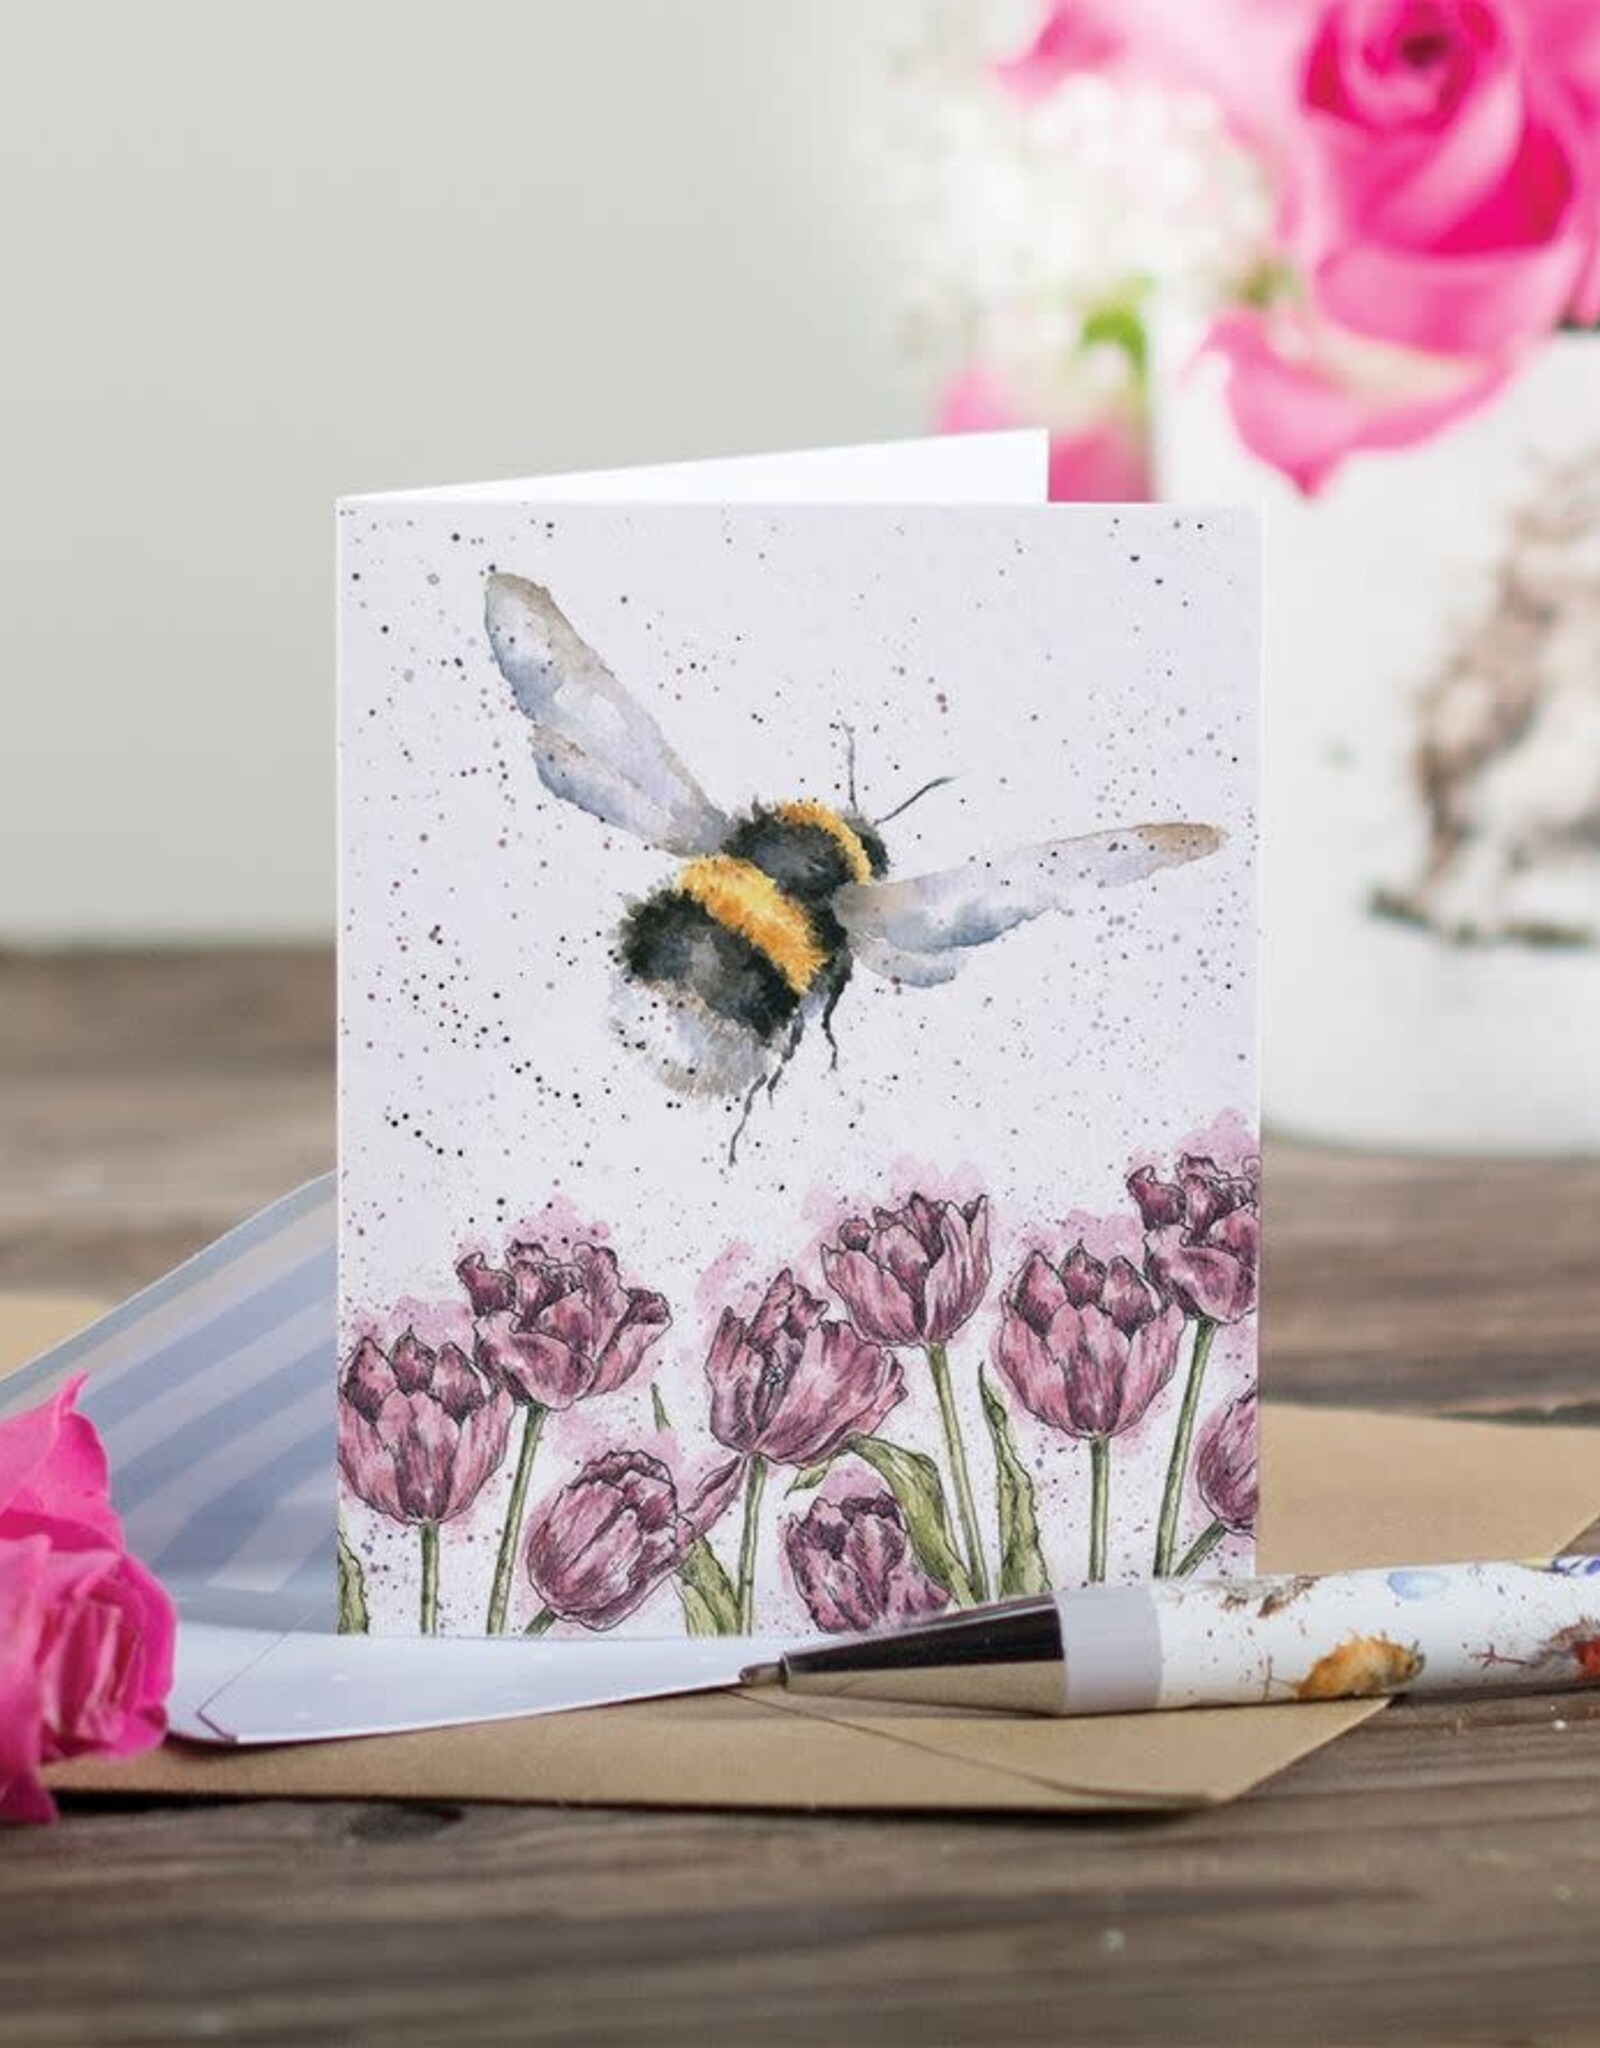 Wrendale Design CARD-FLIGHT OF THE BUMBLEBEE GIFT ENCLOSURE